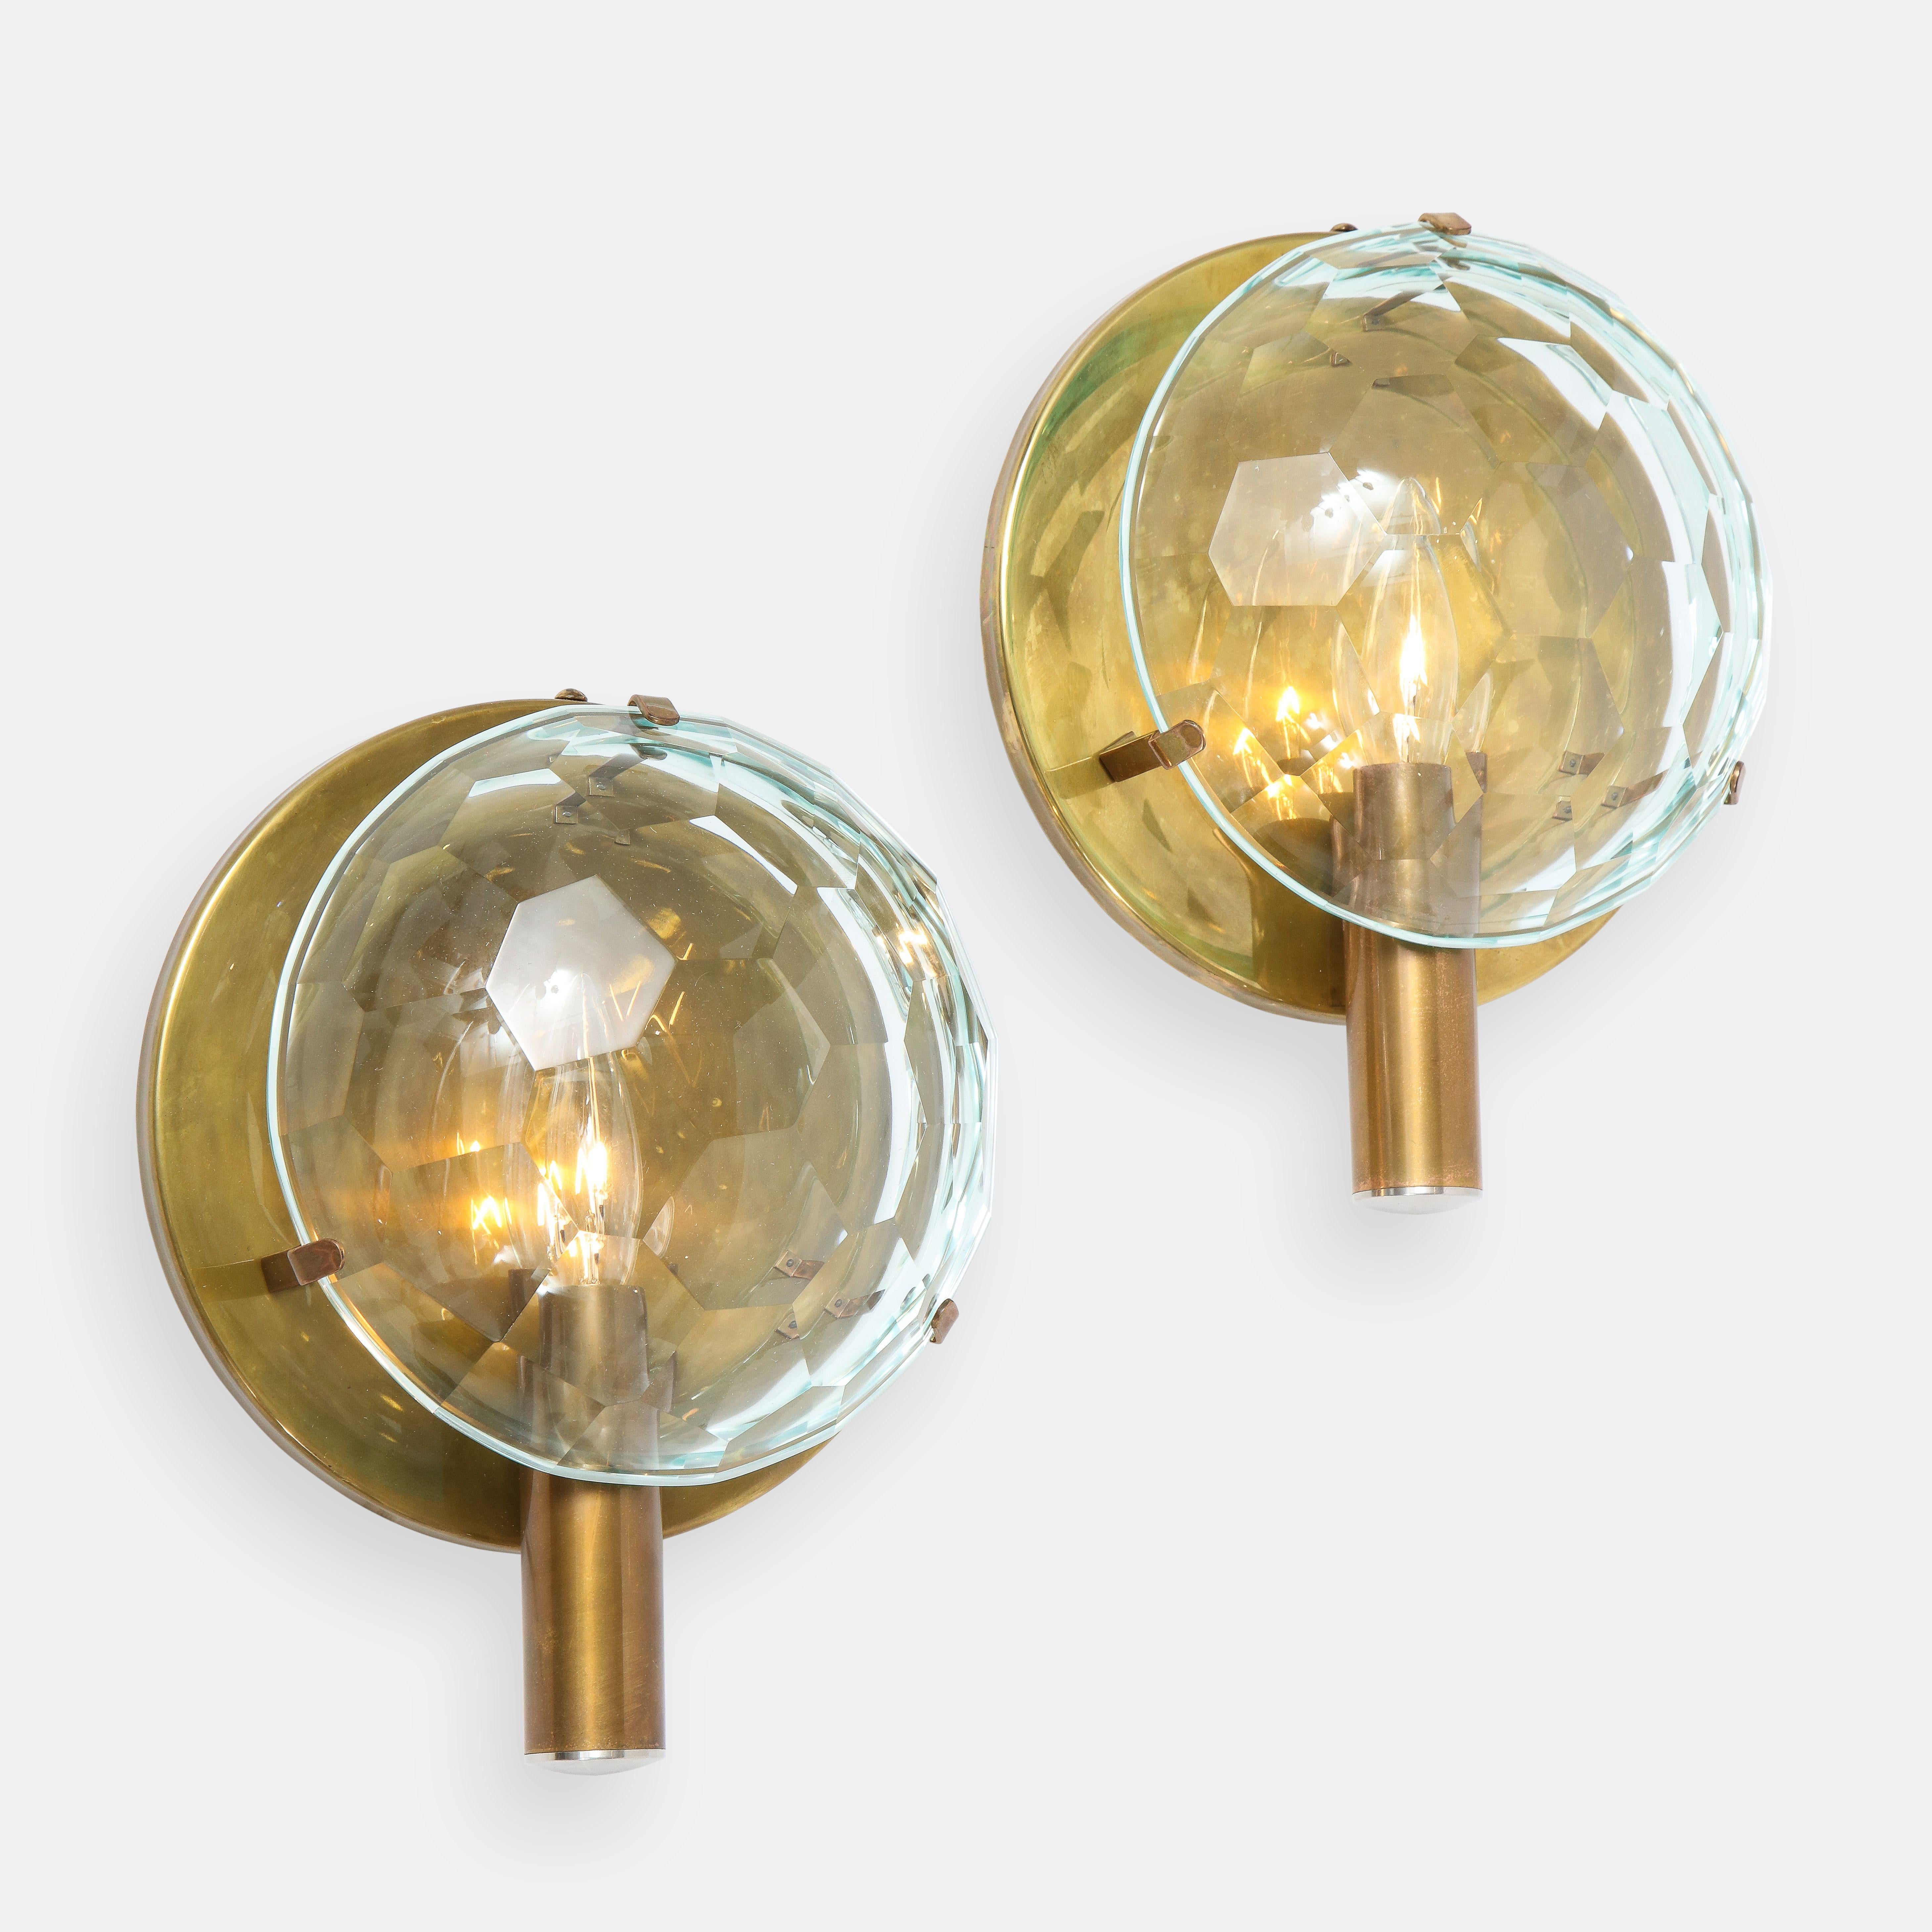 Rare pair of sconces with convex faceted crystal disc suspended by three brass brackets attached to brass circular back plate with tubular socket holder. These elegant sconces are unique design in the manner of Fontana Arte from Italy from the 1950s